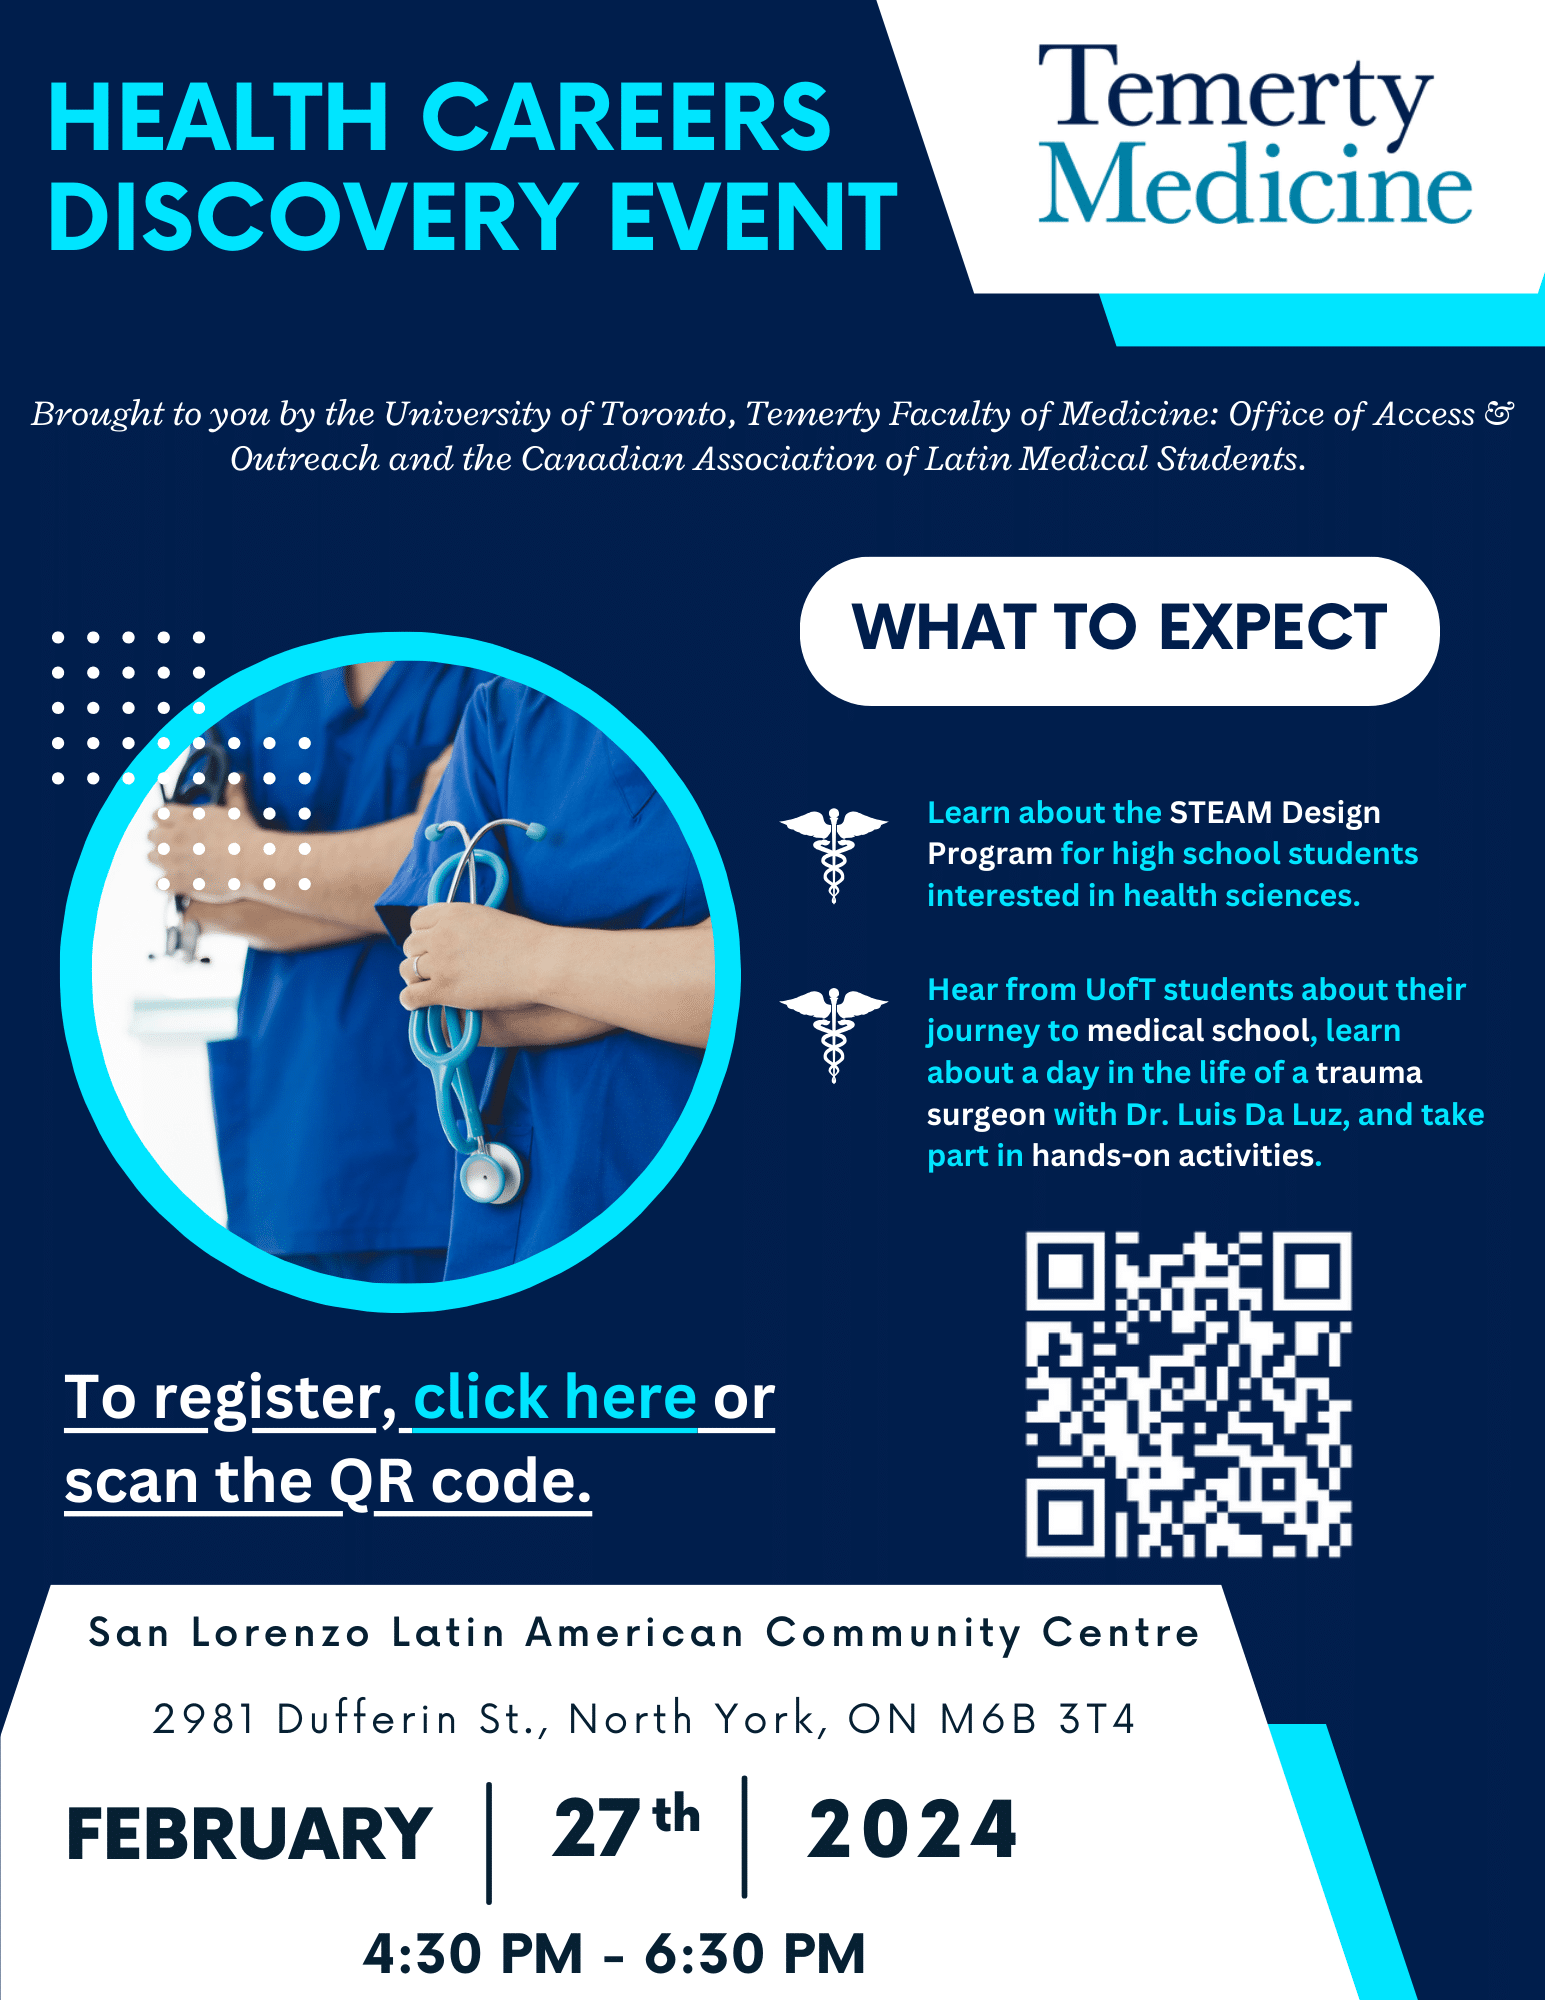 Health Careers Discovery Event at San Lorenzo